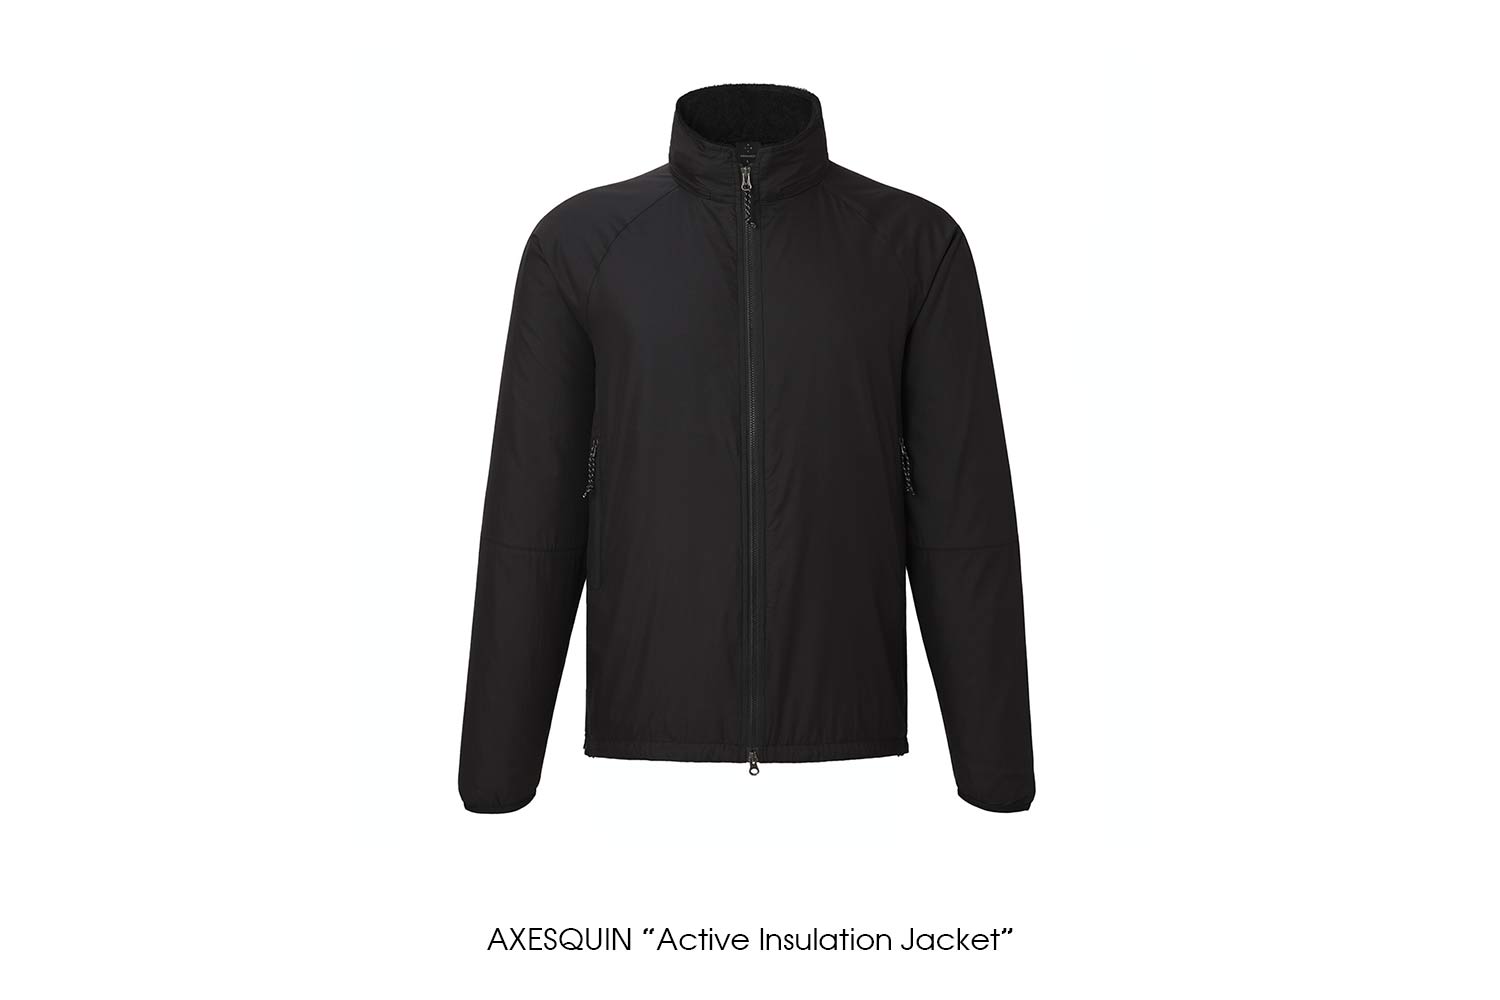 AXESQUIN "Active Insulation Jacket"